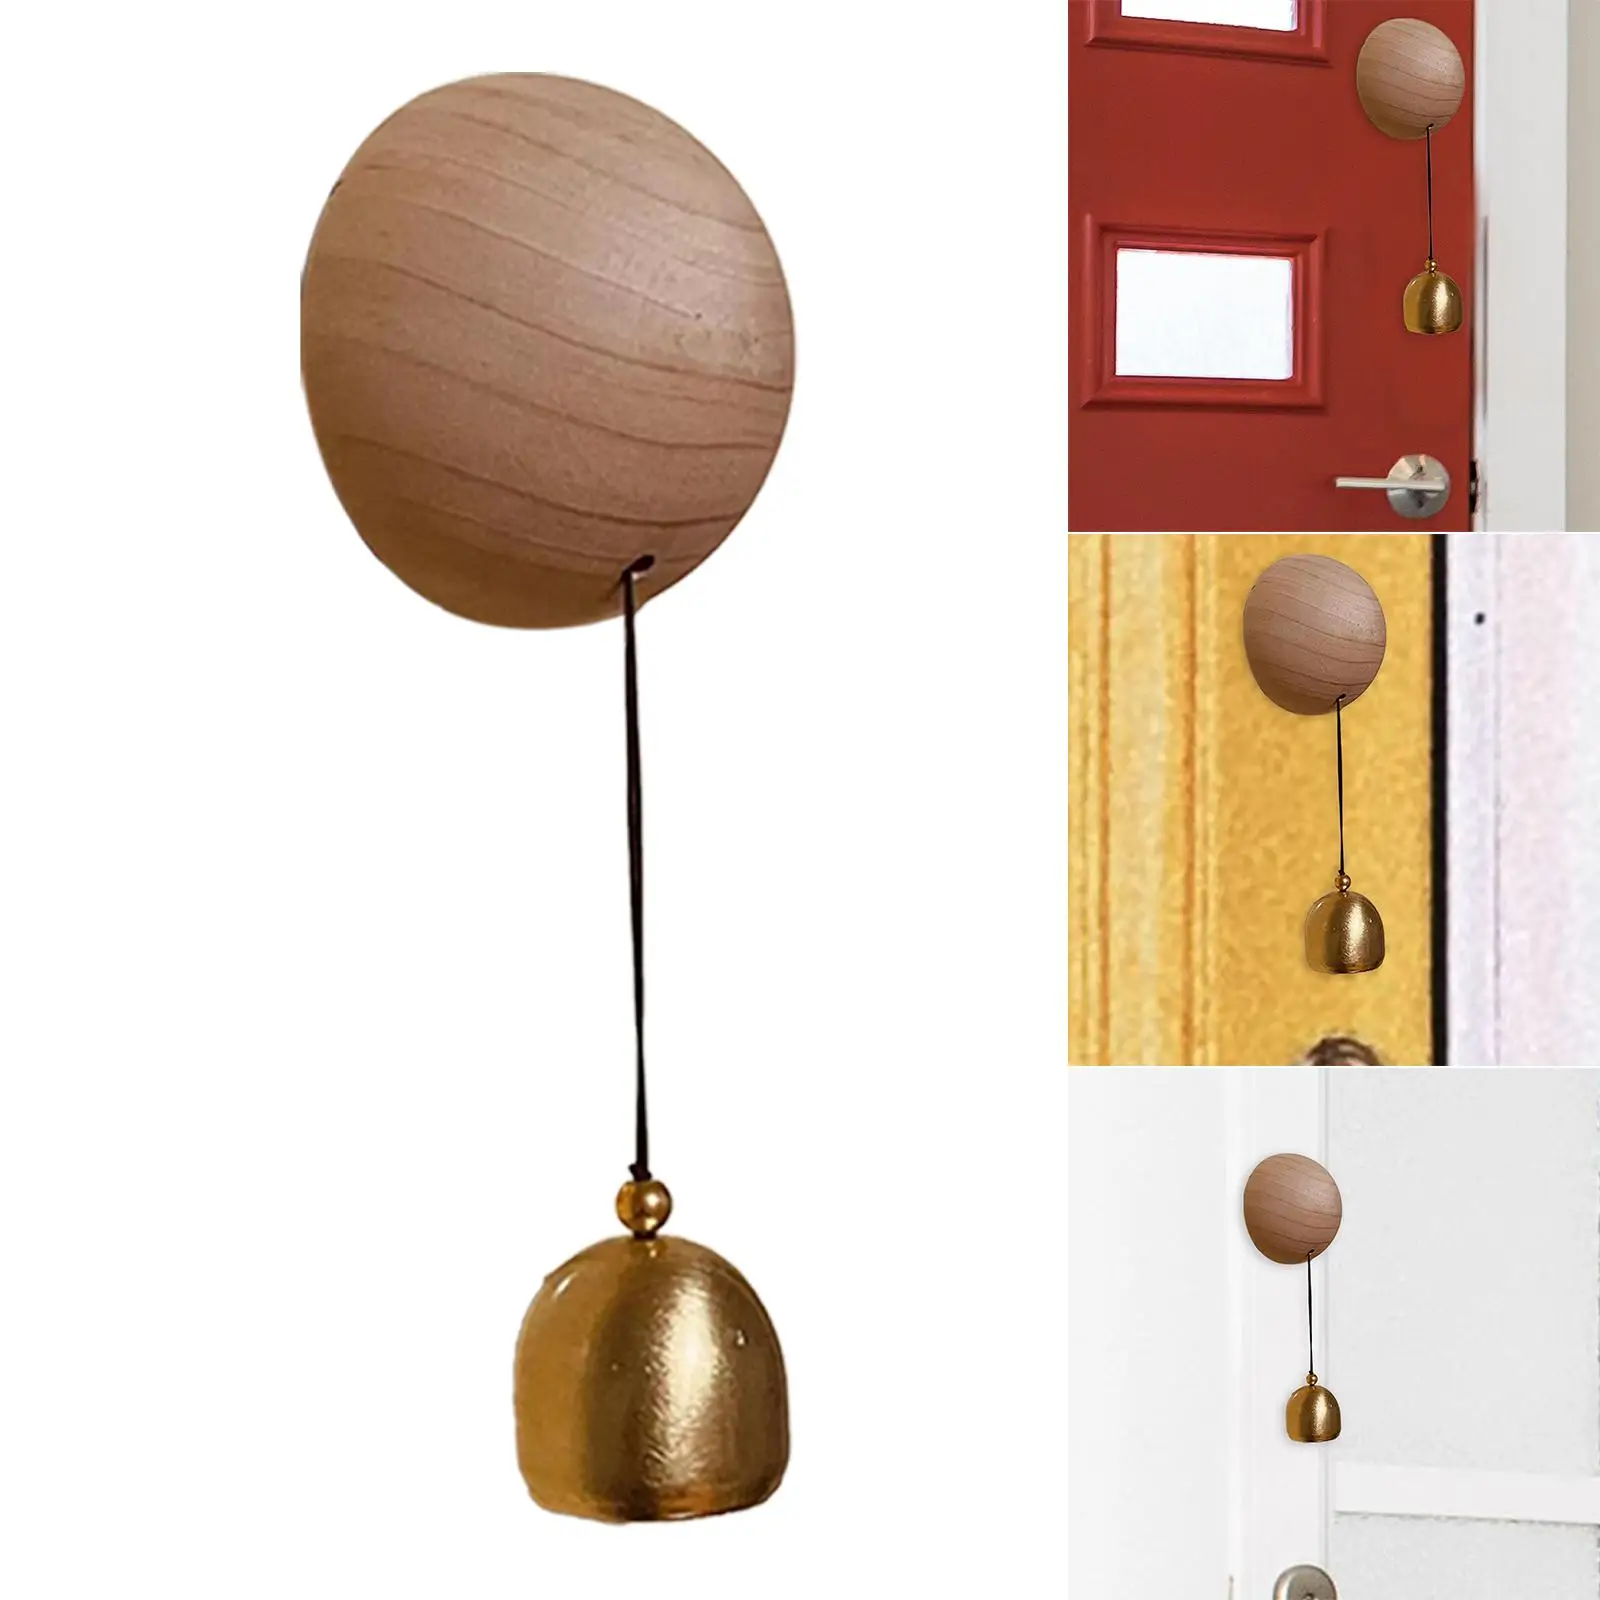 Creative Wind Chime Decorative Hanging Bell Entry Doorbell Shopkeepers Bell for Door Opening for Porch Fridge Coffee Bar